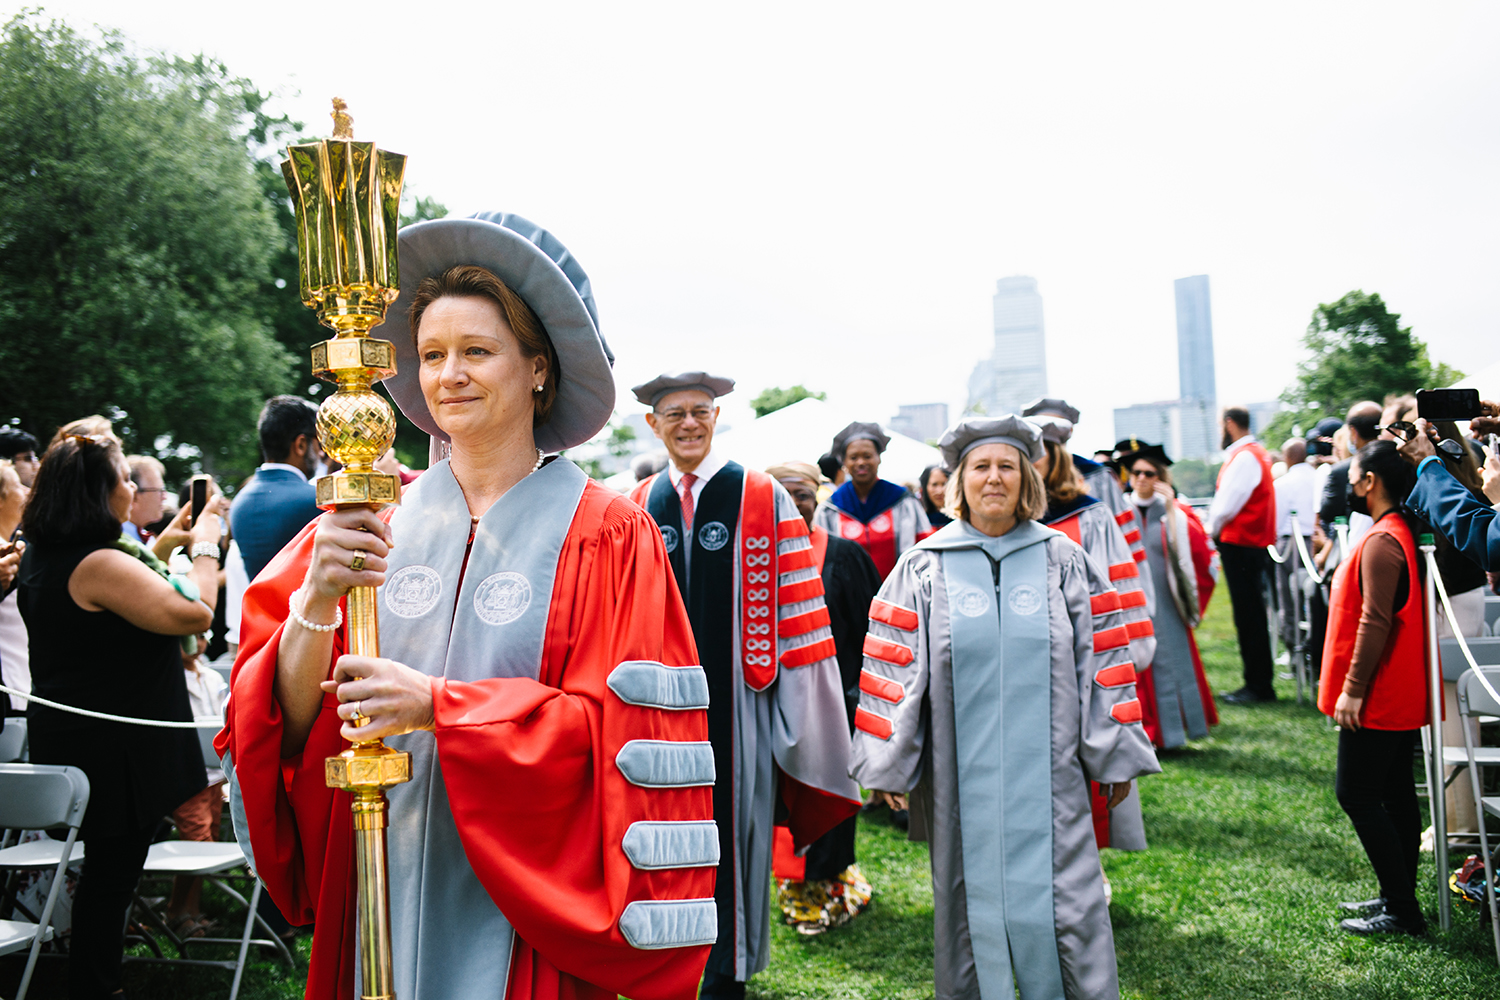 MIT Alumni Association President Annalisa Weigel ’94, ’95, SM ’00, PhD ’02 served as the chief marshal at Commencement